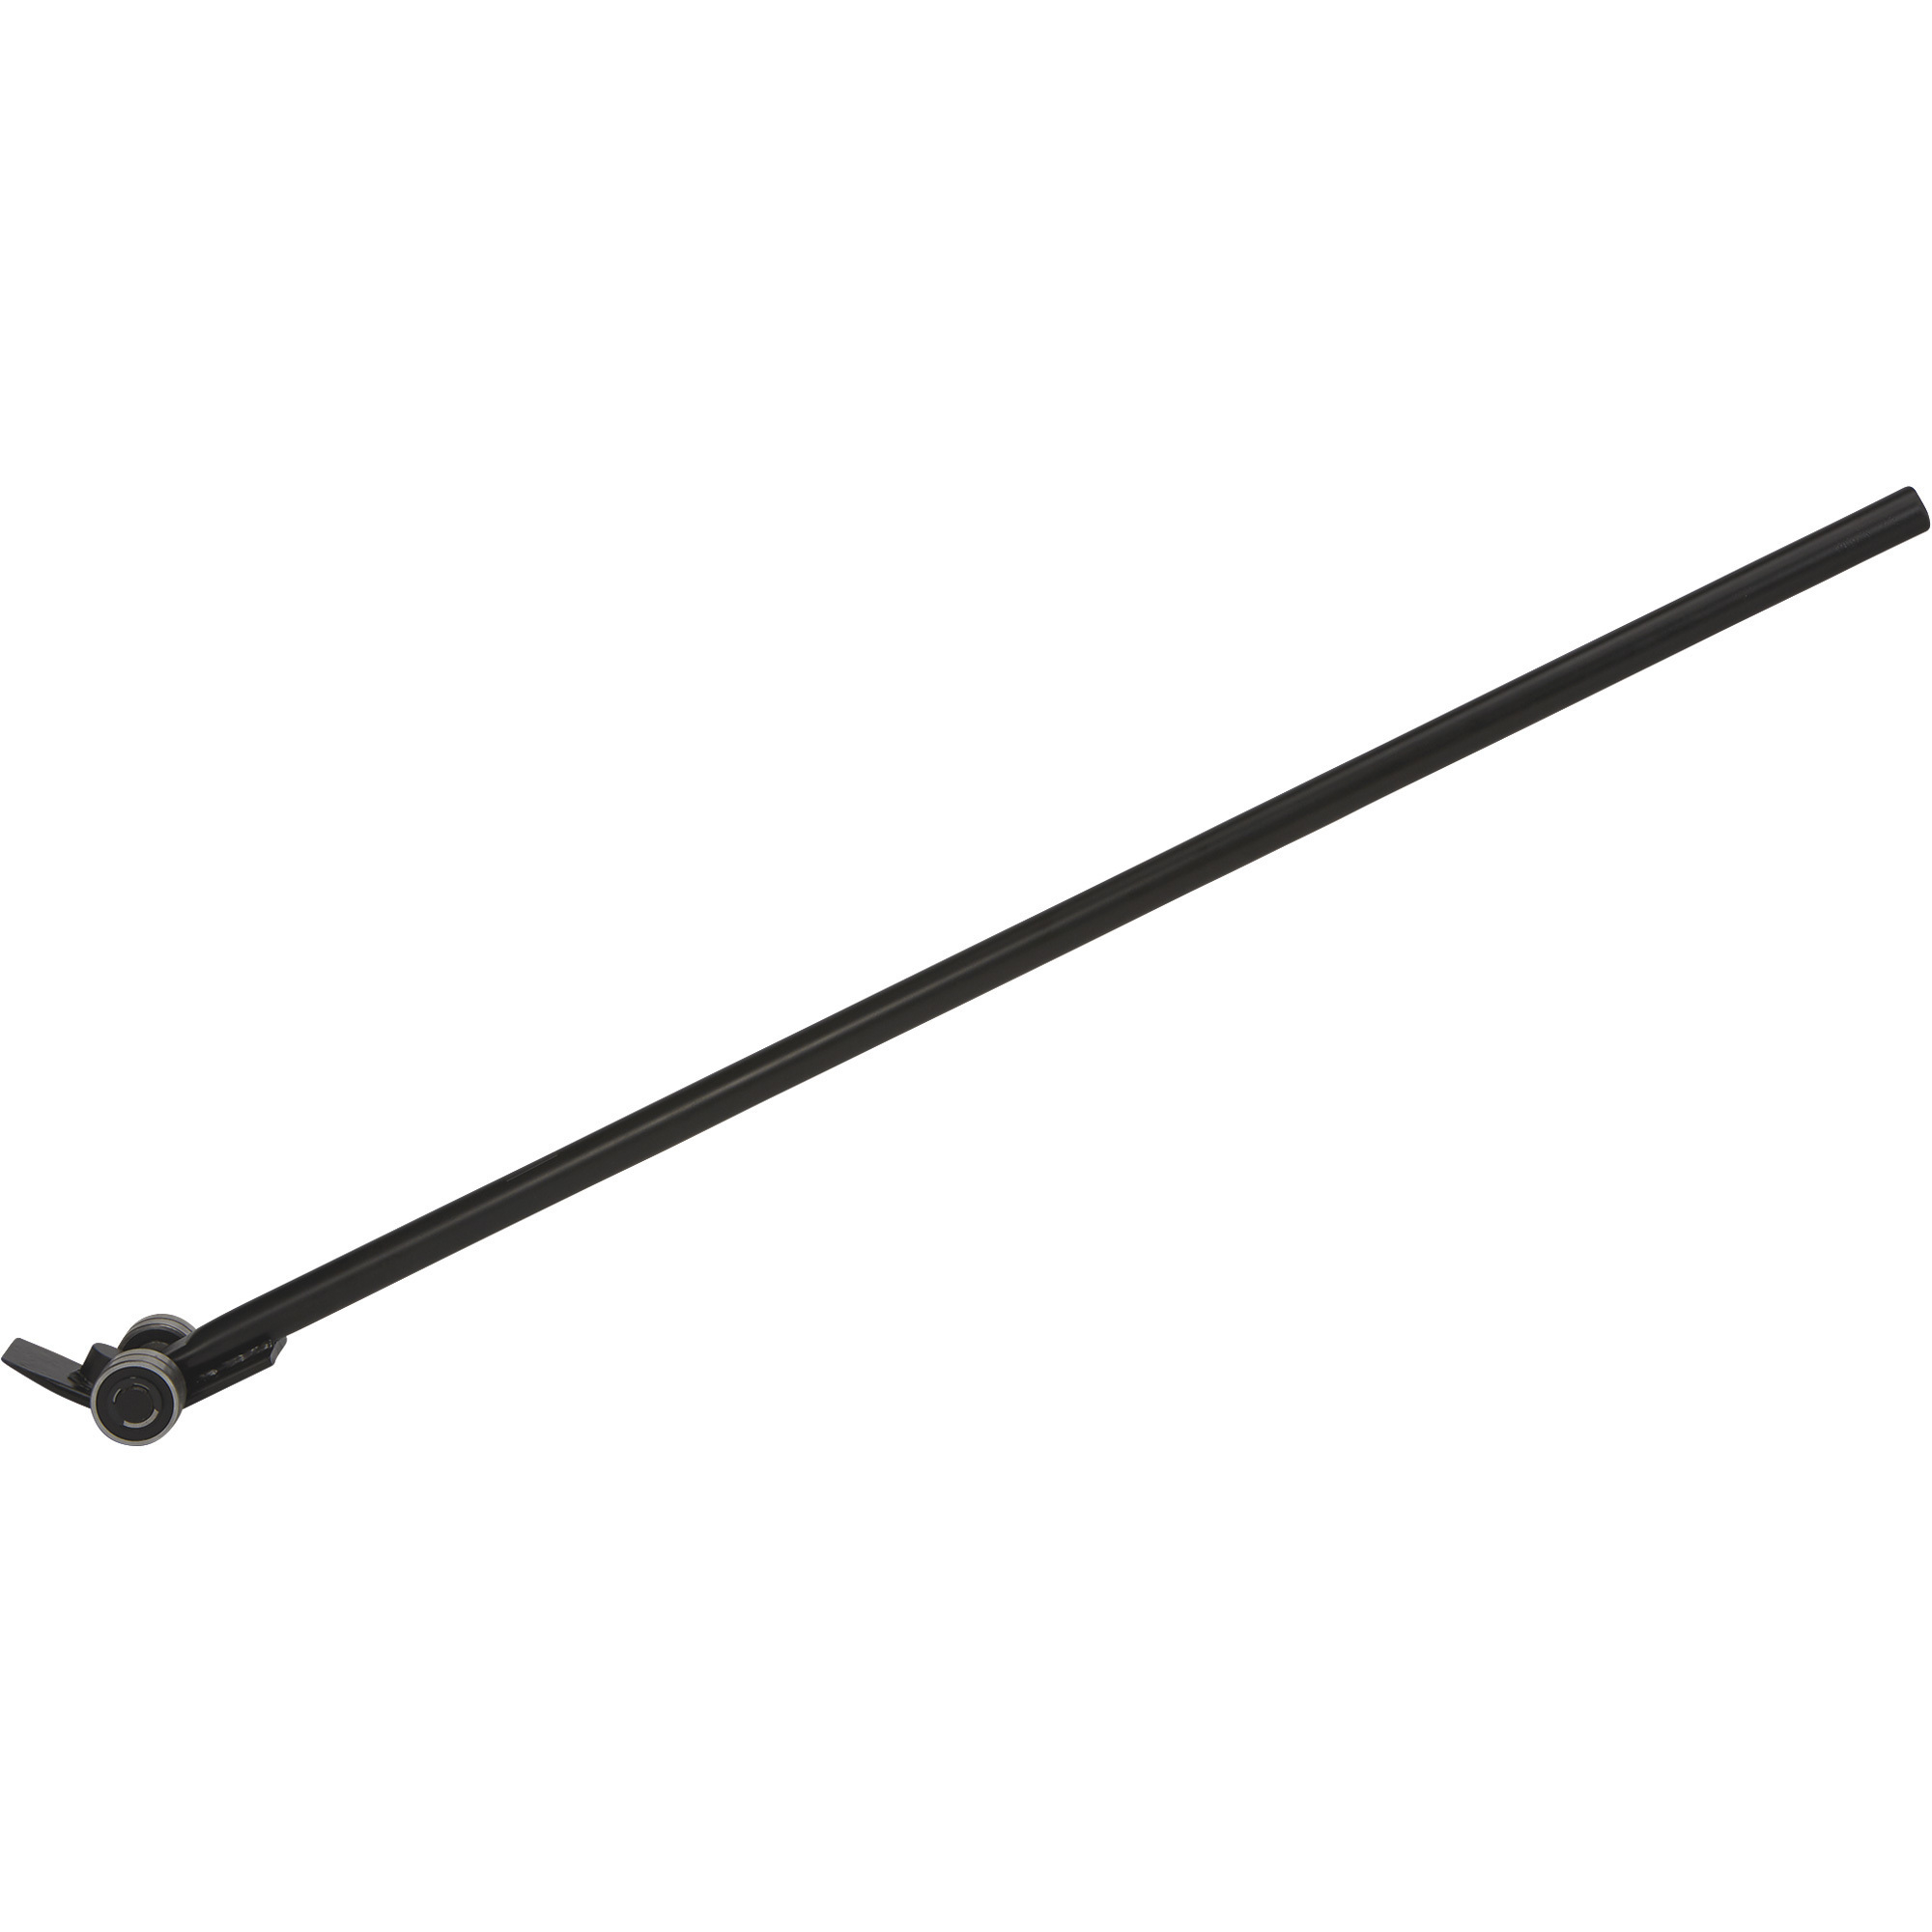 Strongway Steel Pry Bar Lever, 6600-Lb. Capacity